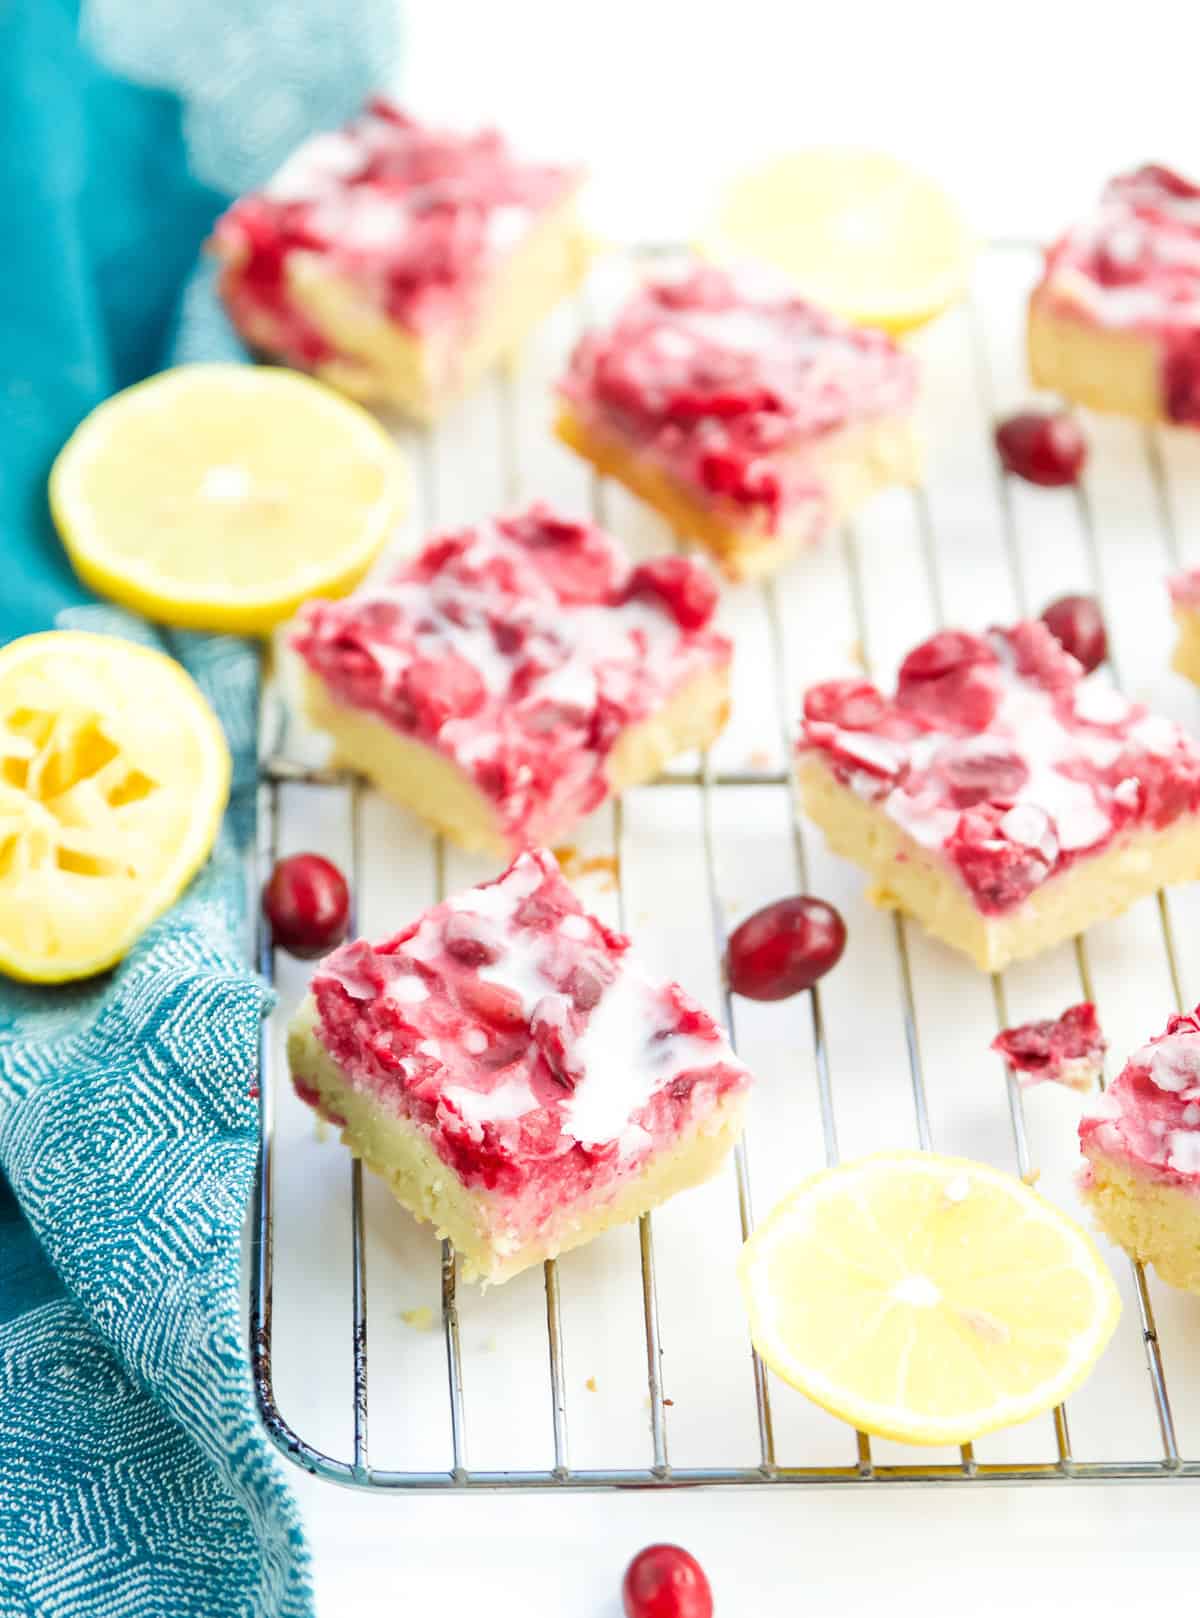 Many gluten free lemon bars with cranberry on a wire rack